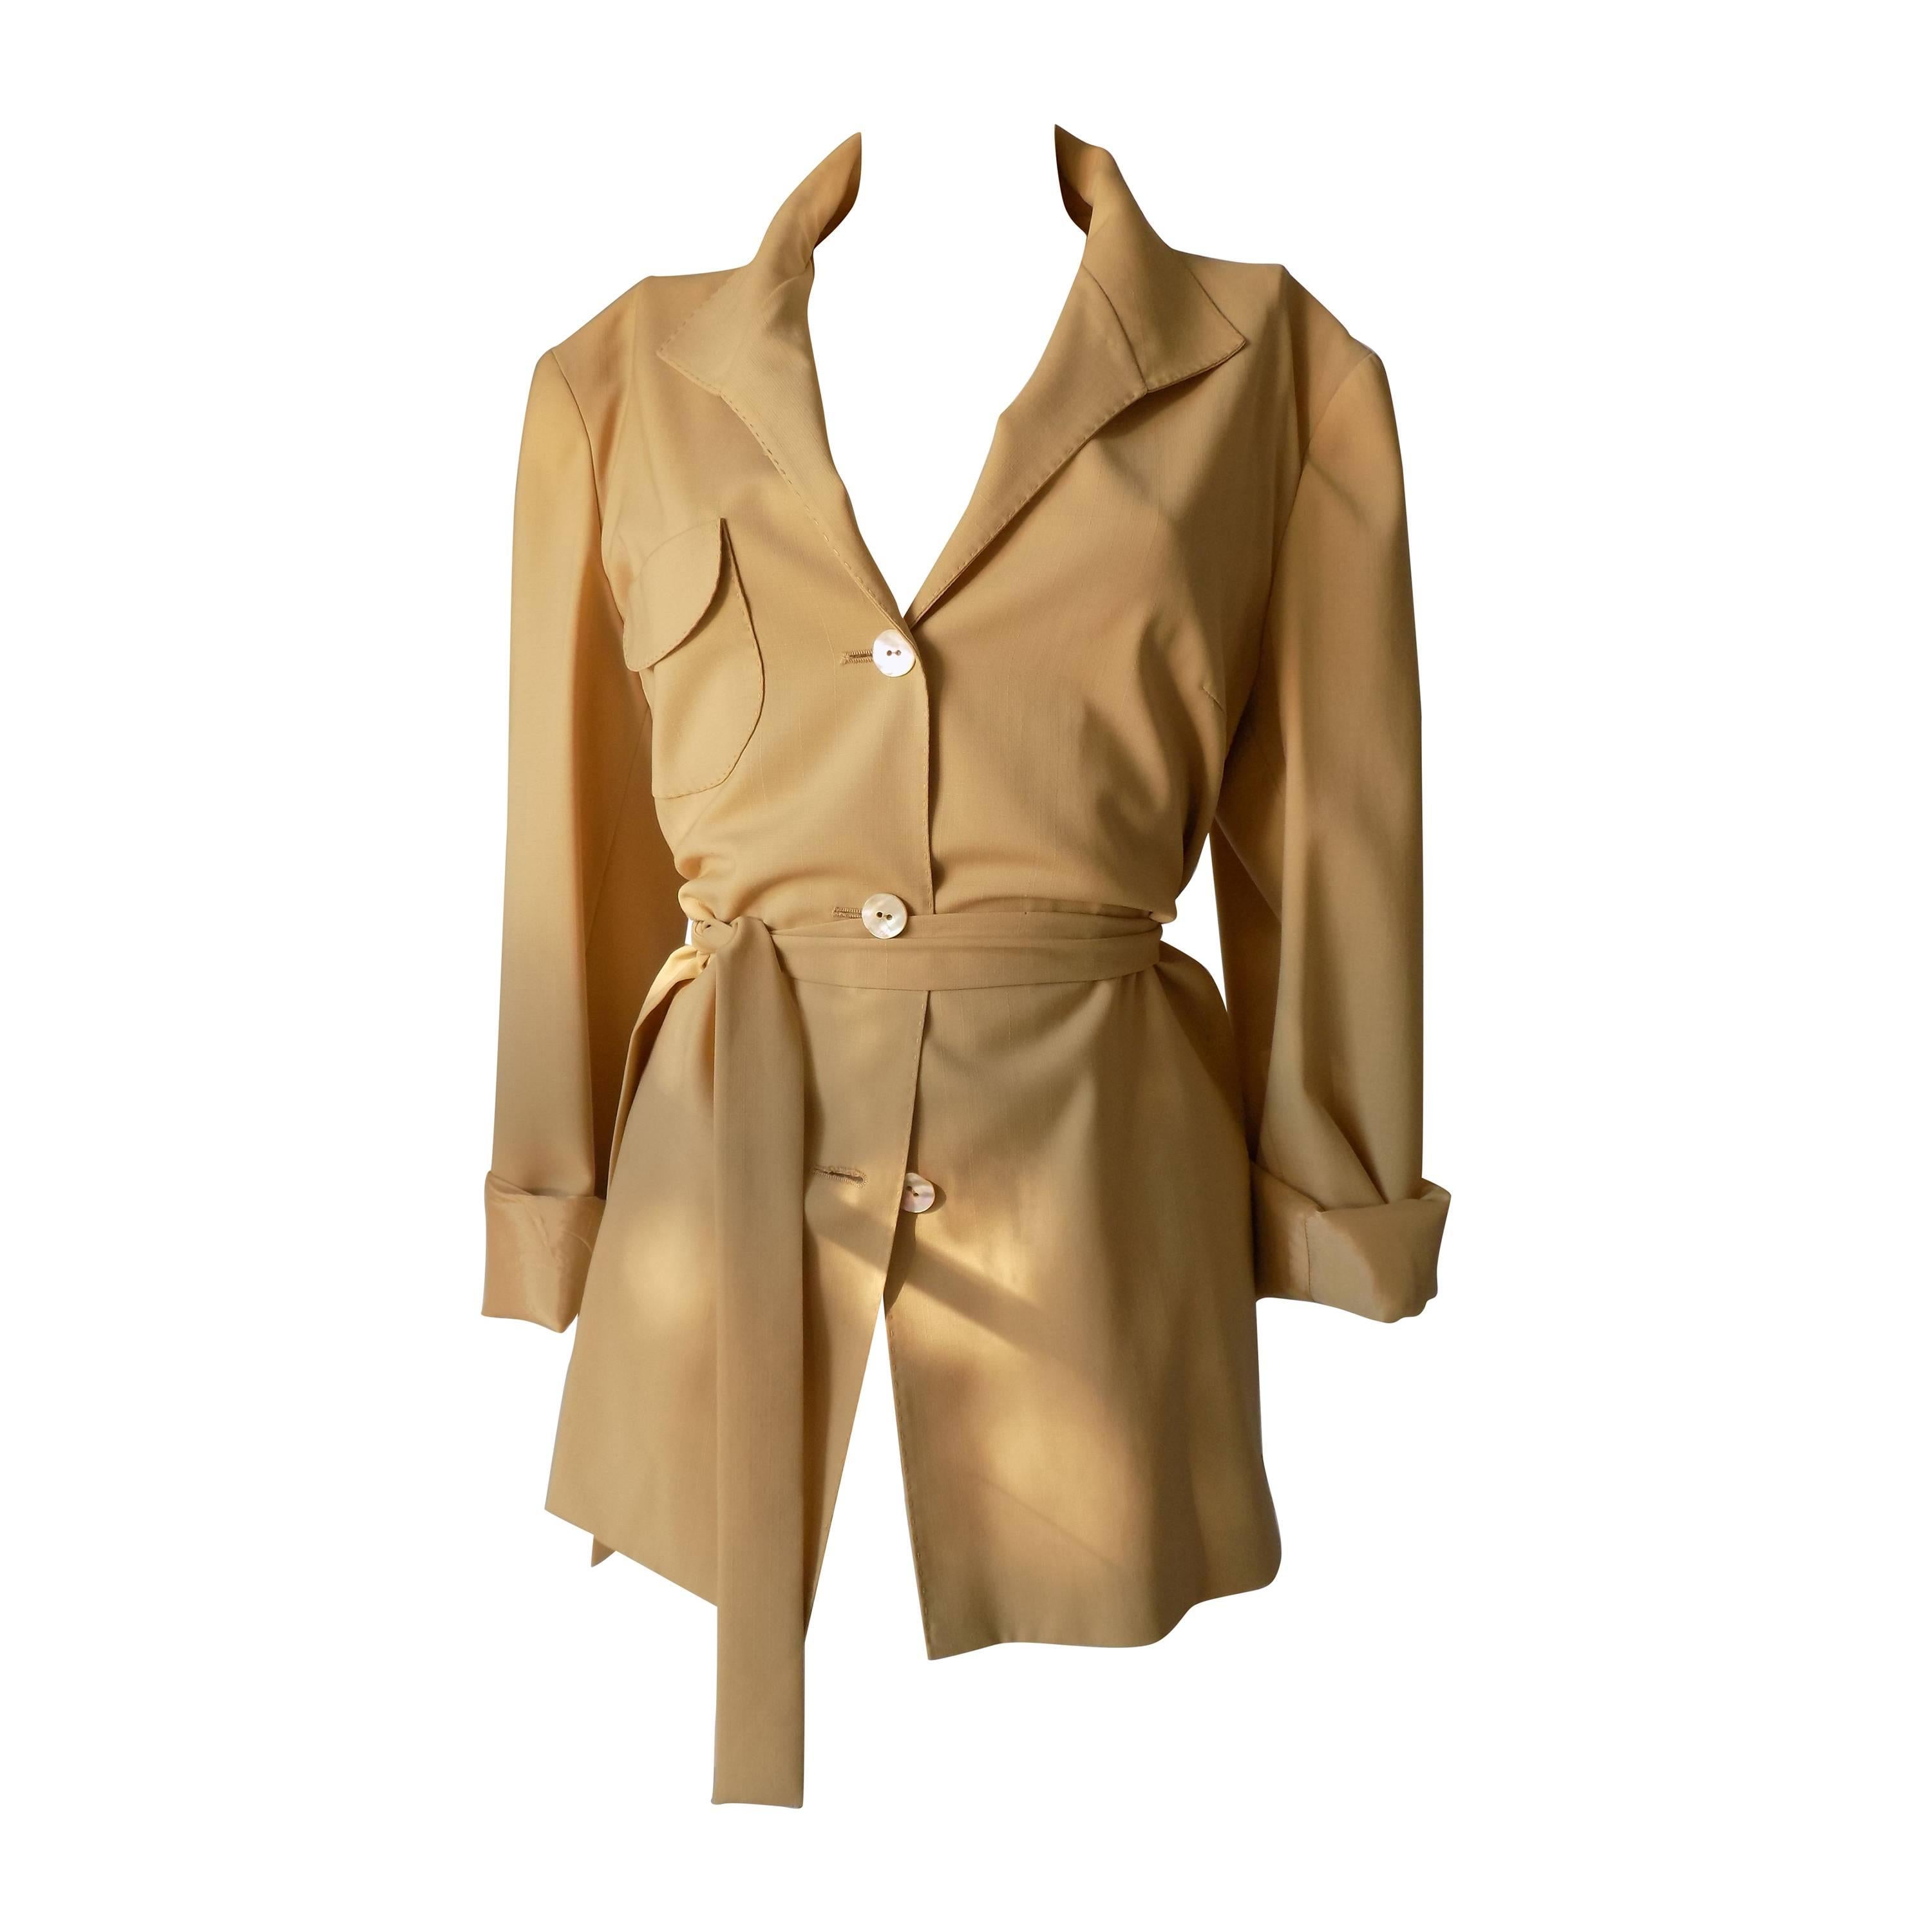 1980s Genny by Gianni Versace light brown wool jacket